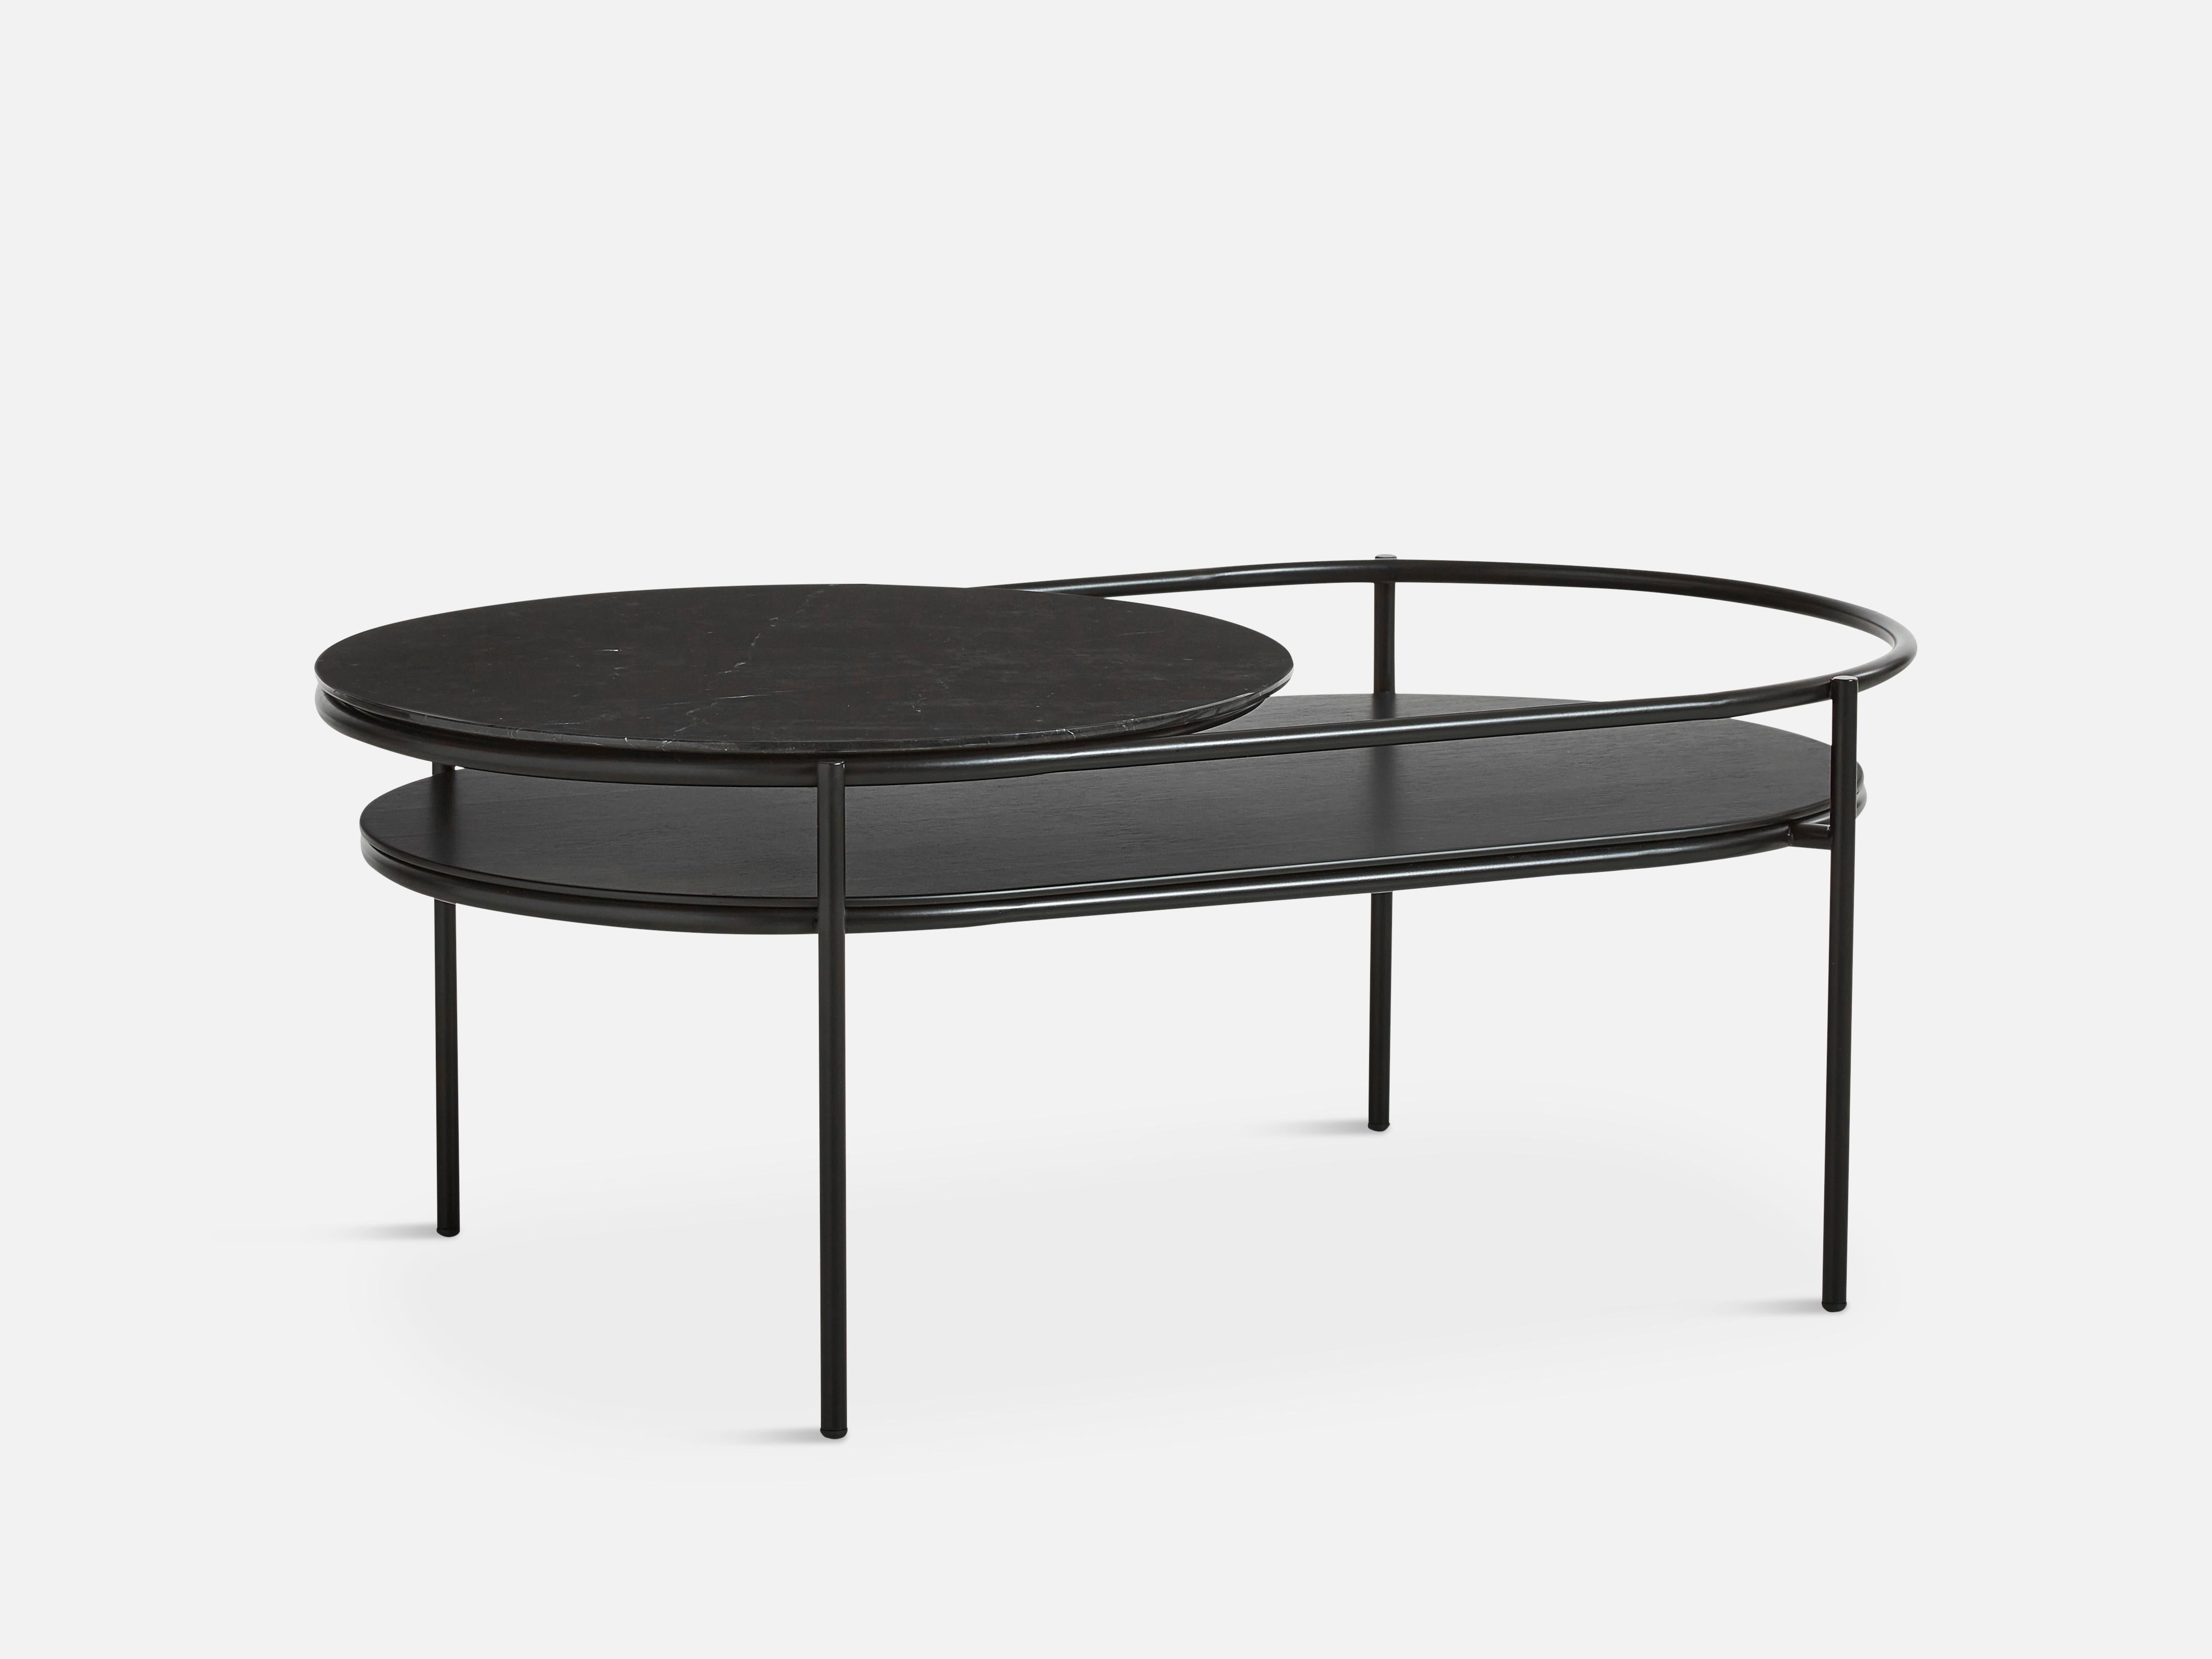 Verde coffee black table by Rikke Frost
Materials: metal, oak, Nero Marquina marble.
Dimensions: D 60 x W 106 x H 41 cm

The founders, Mia and Torben Koed, decided to put their 30 years of experience into a new project. It was time for a change